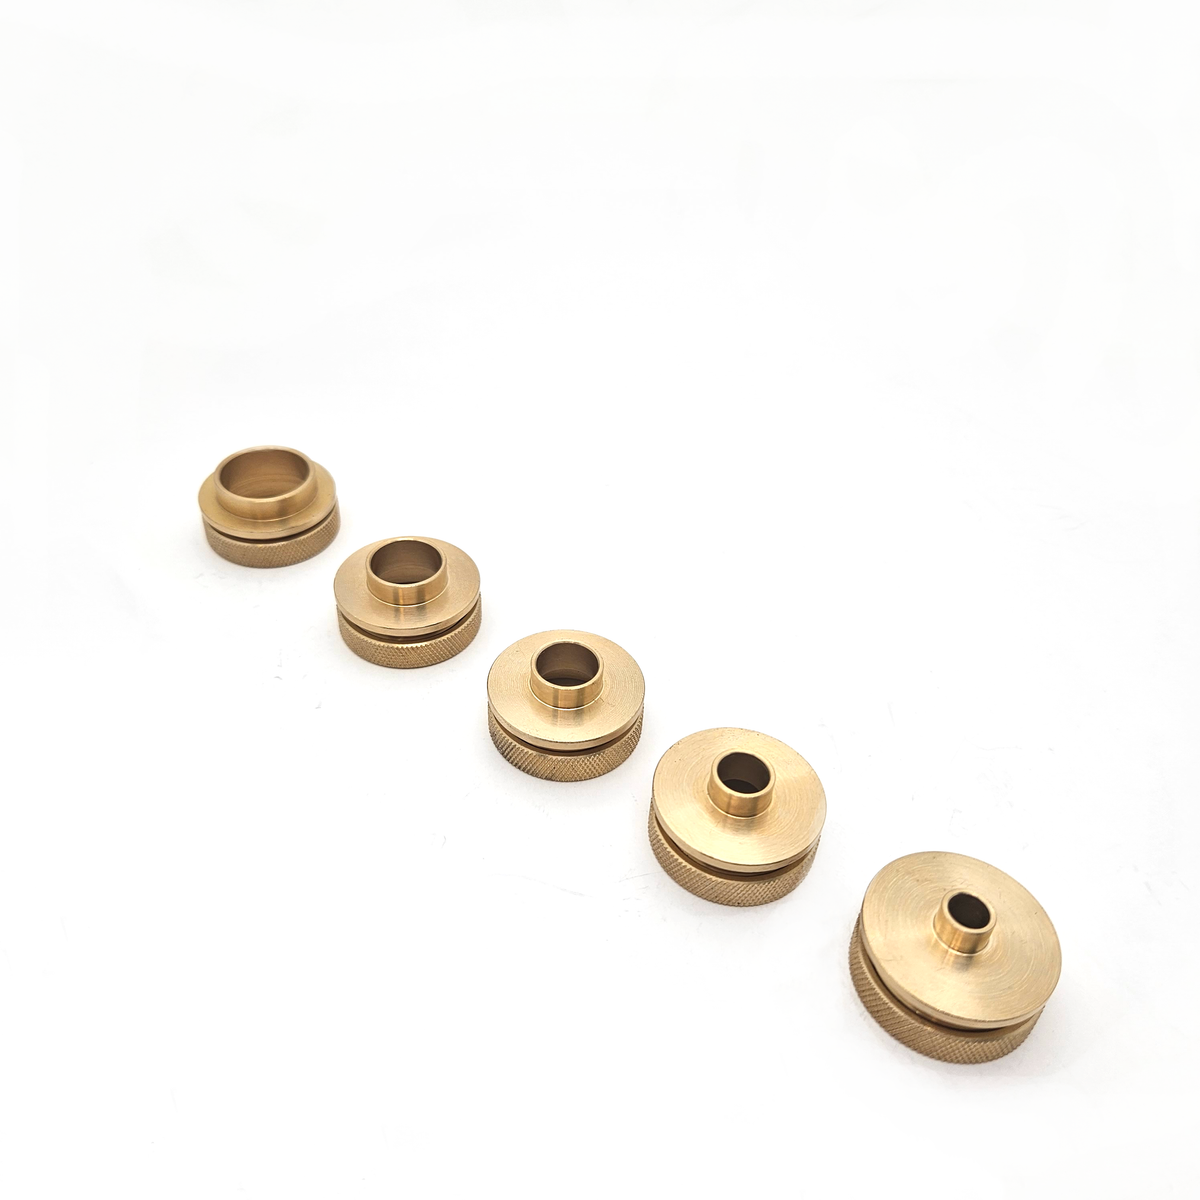 KATSU Tools Brass Router Guide Bush Bushing Set with Case - 10 Pieces on  OnBuy